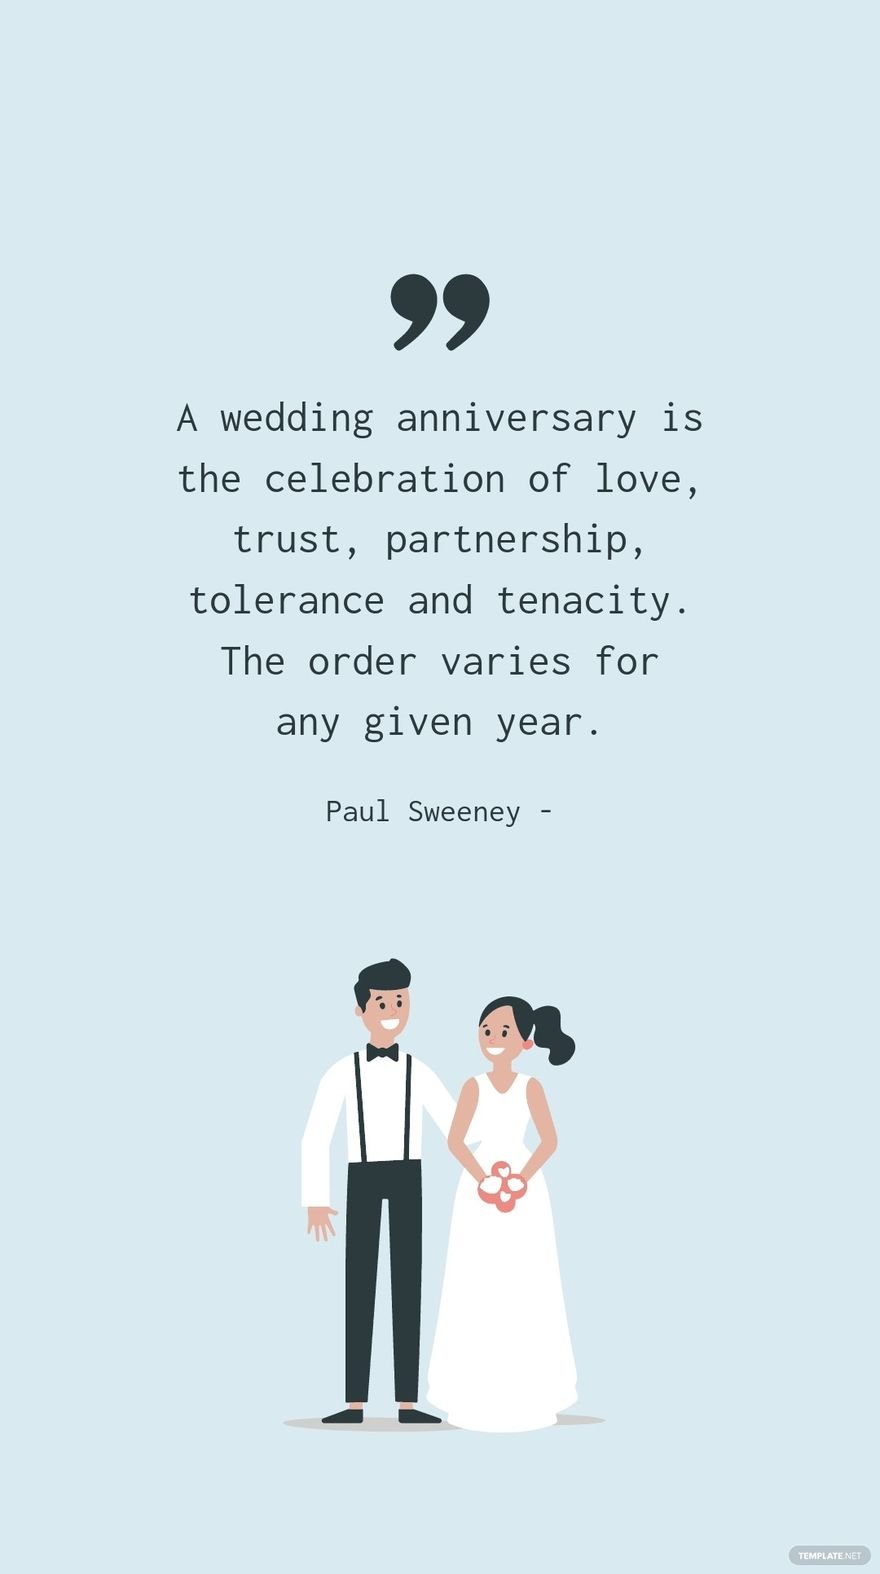 Free Paul Sweeney - A wedding anniversary is the celebration of love, trust, partnership, tolerance and tenacity. The order varies for any given year. in JPG